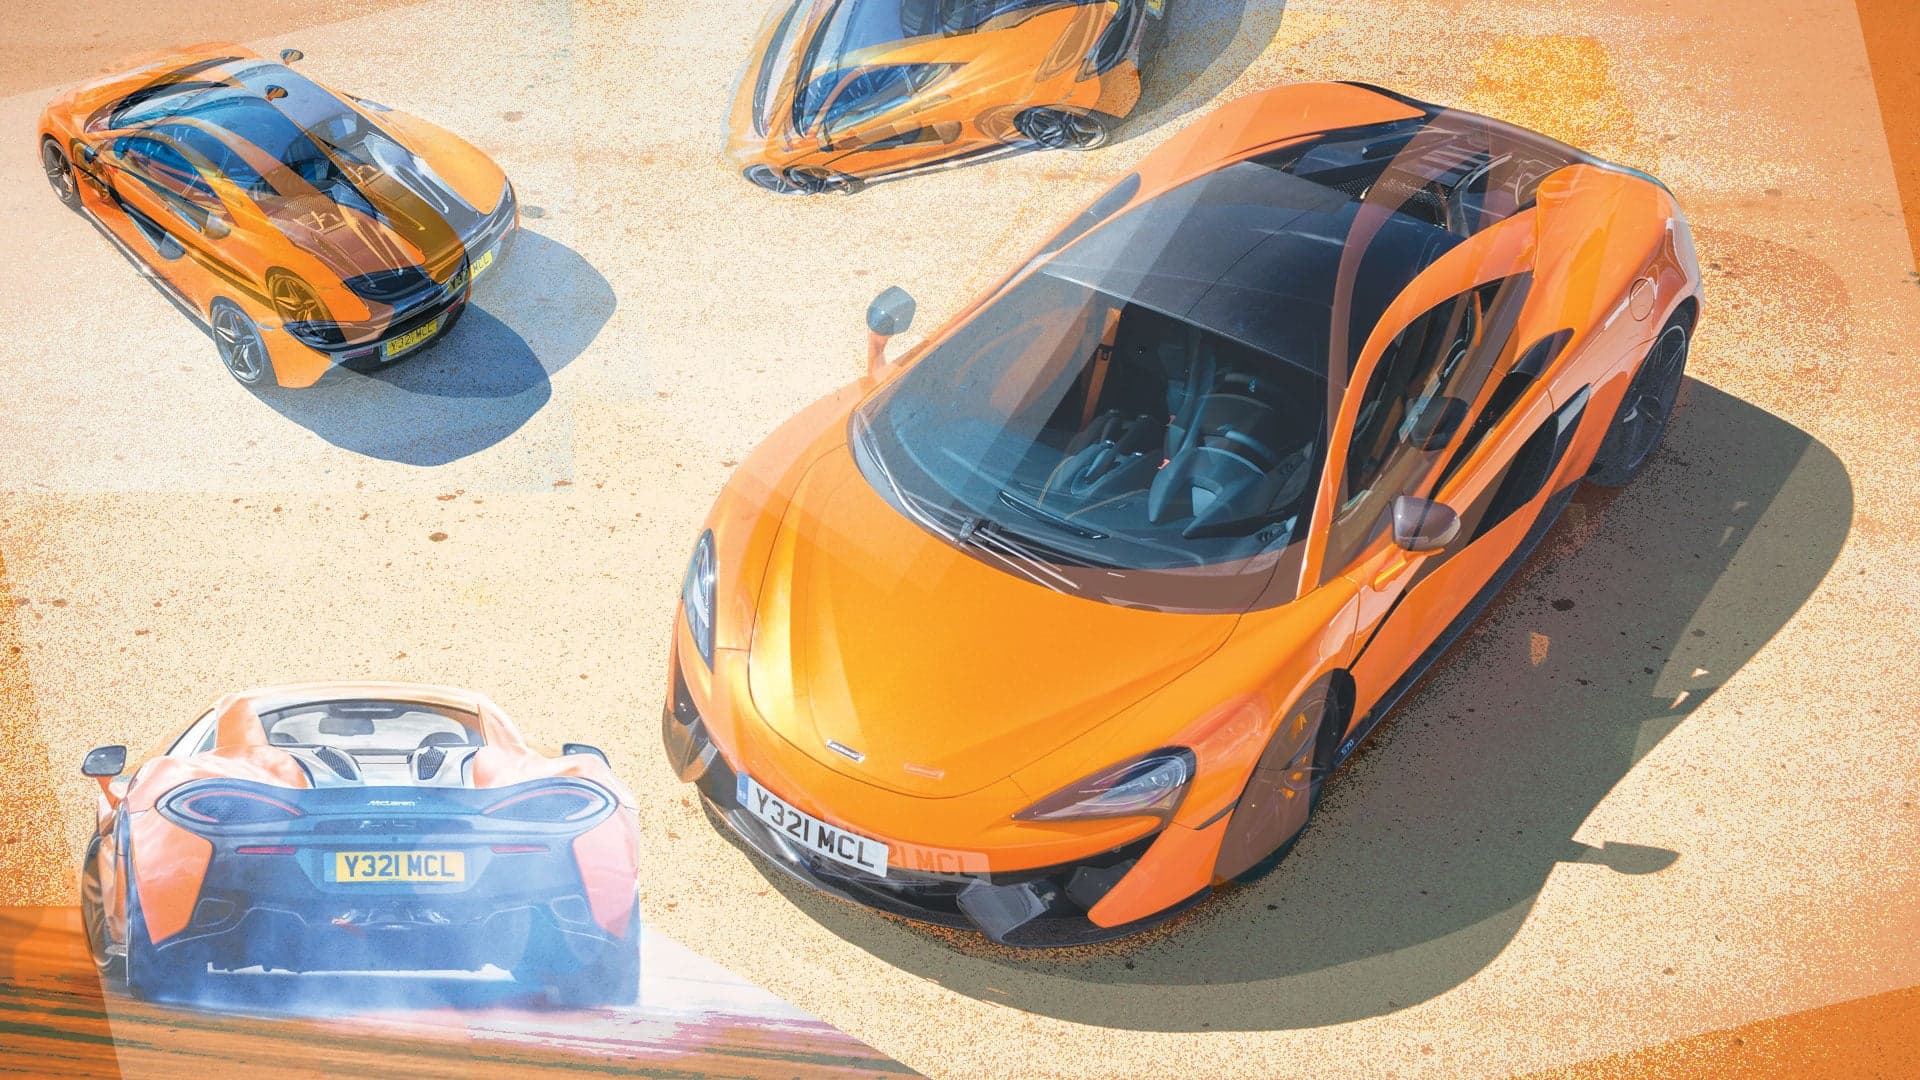 The McLaren 570S and Aston Martin V12 Vantage S Manual: It’s What’s for Brexit